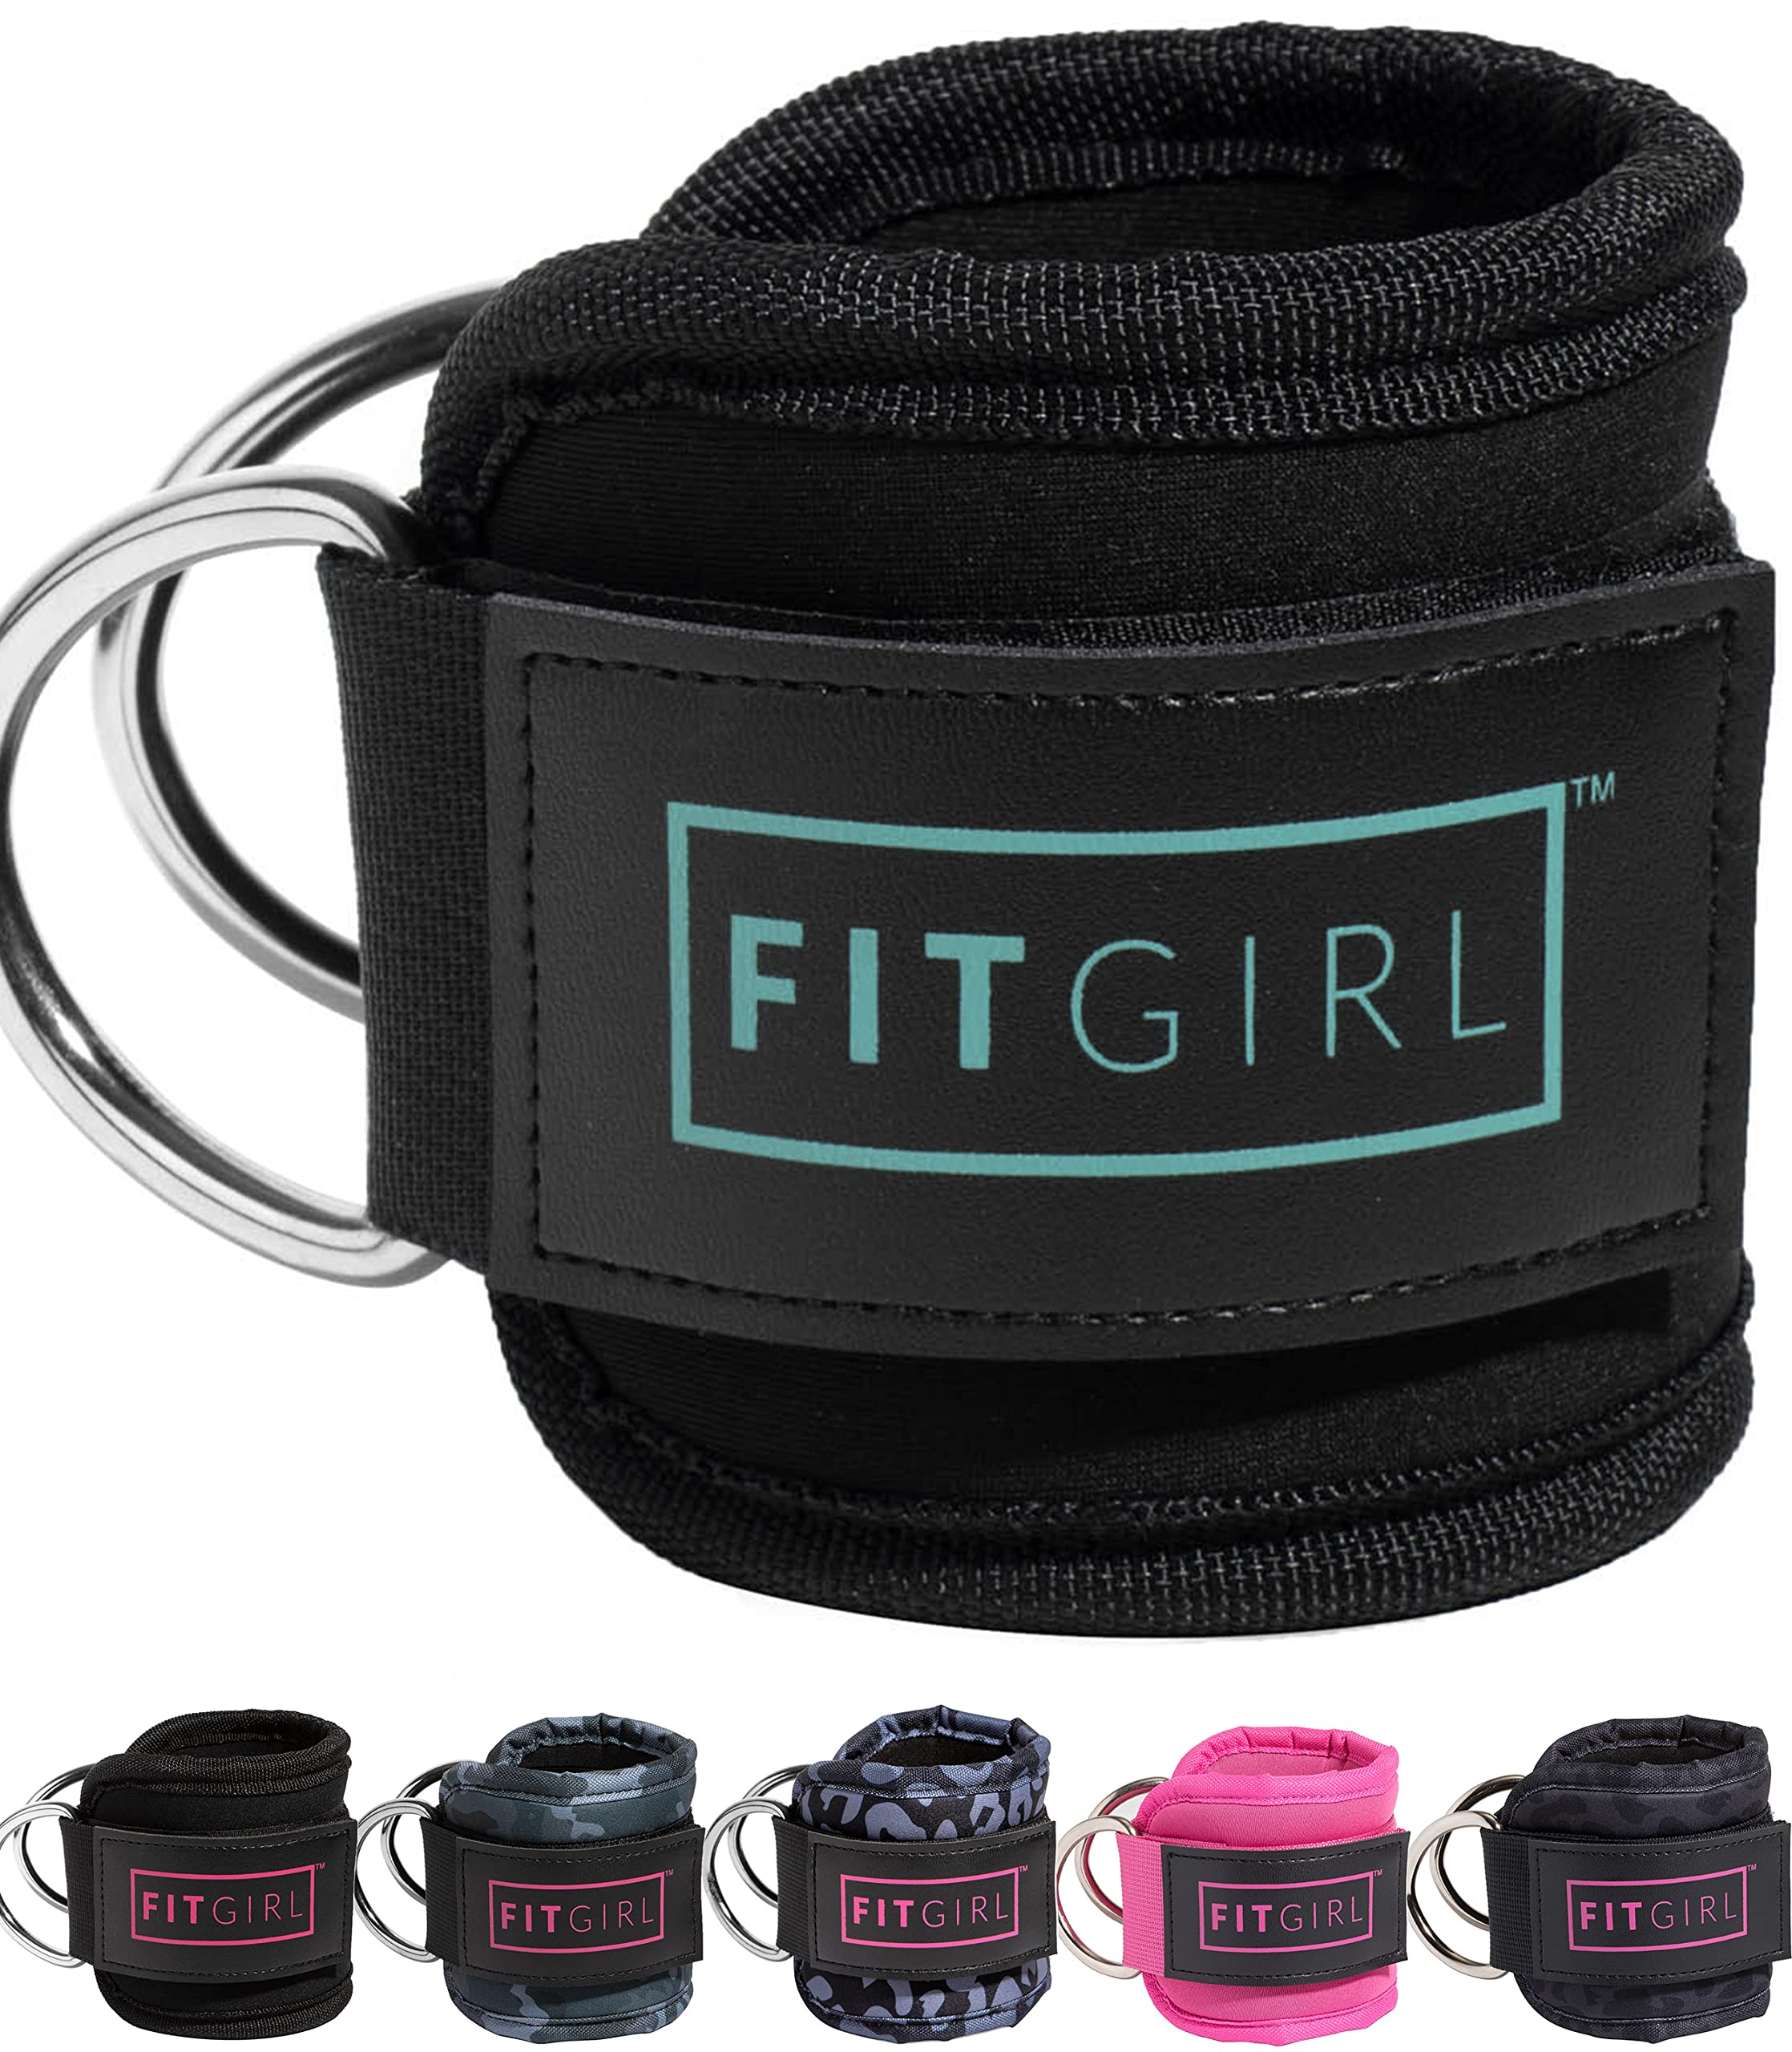 FITGIRL - Ankle Strap for Cable Machines and Resistance Bands, Work Out Cuff Attachment for Home & Gym, Booty Workouts - Kickbac